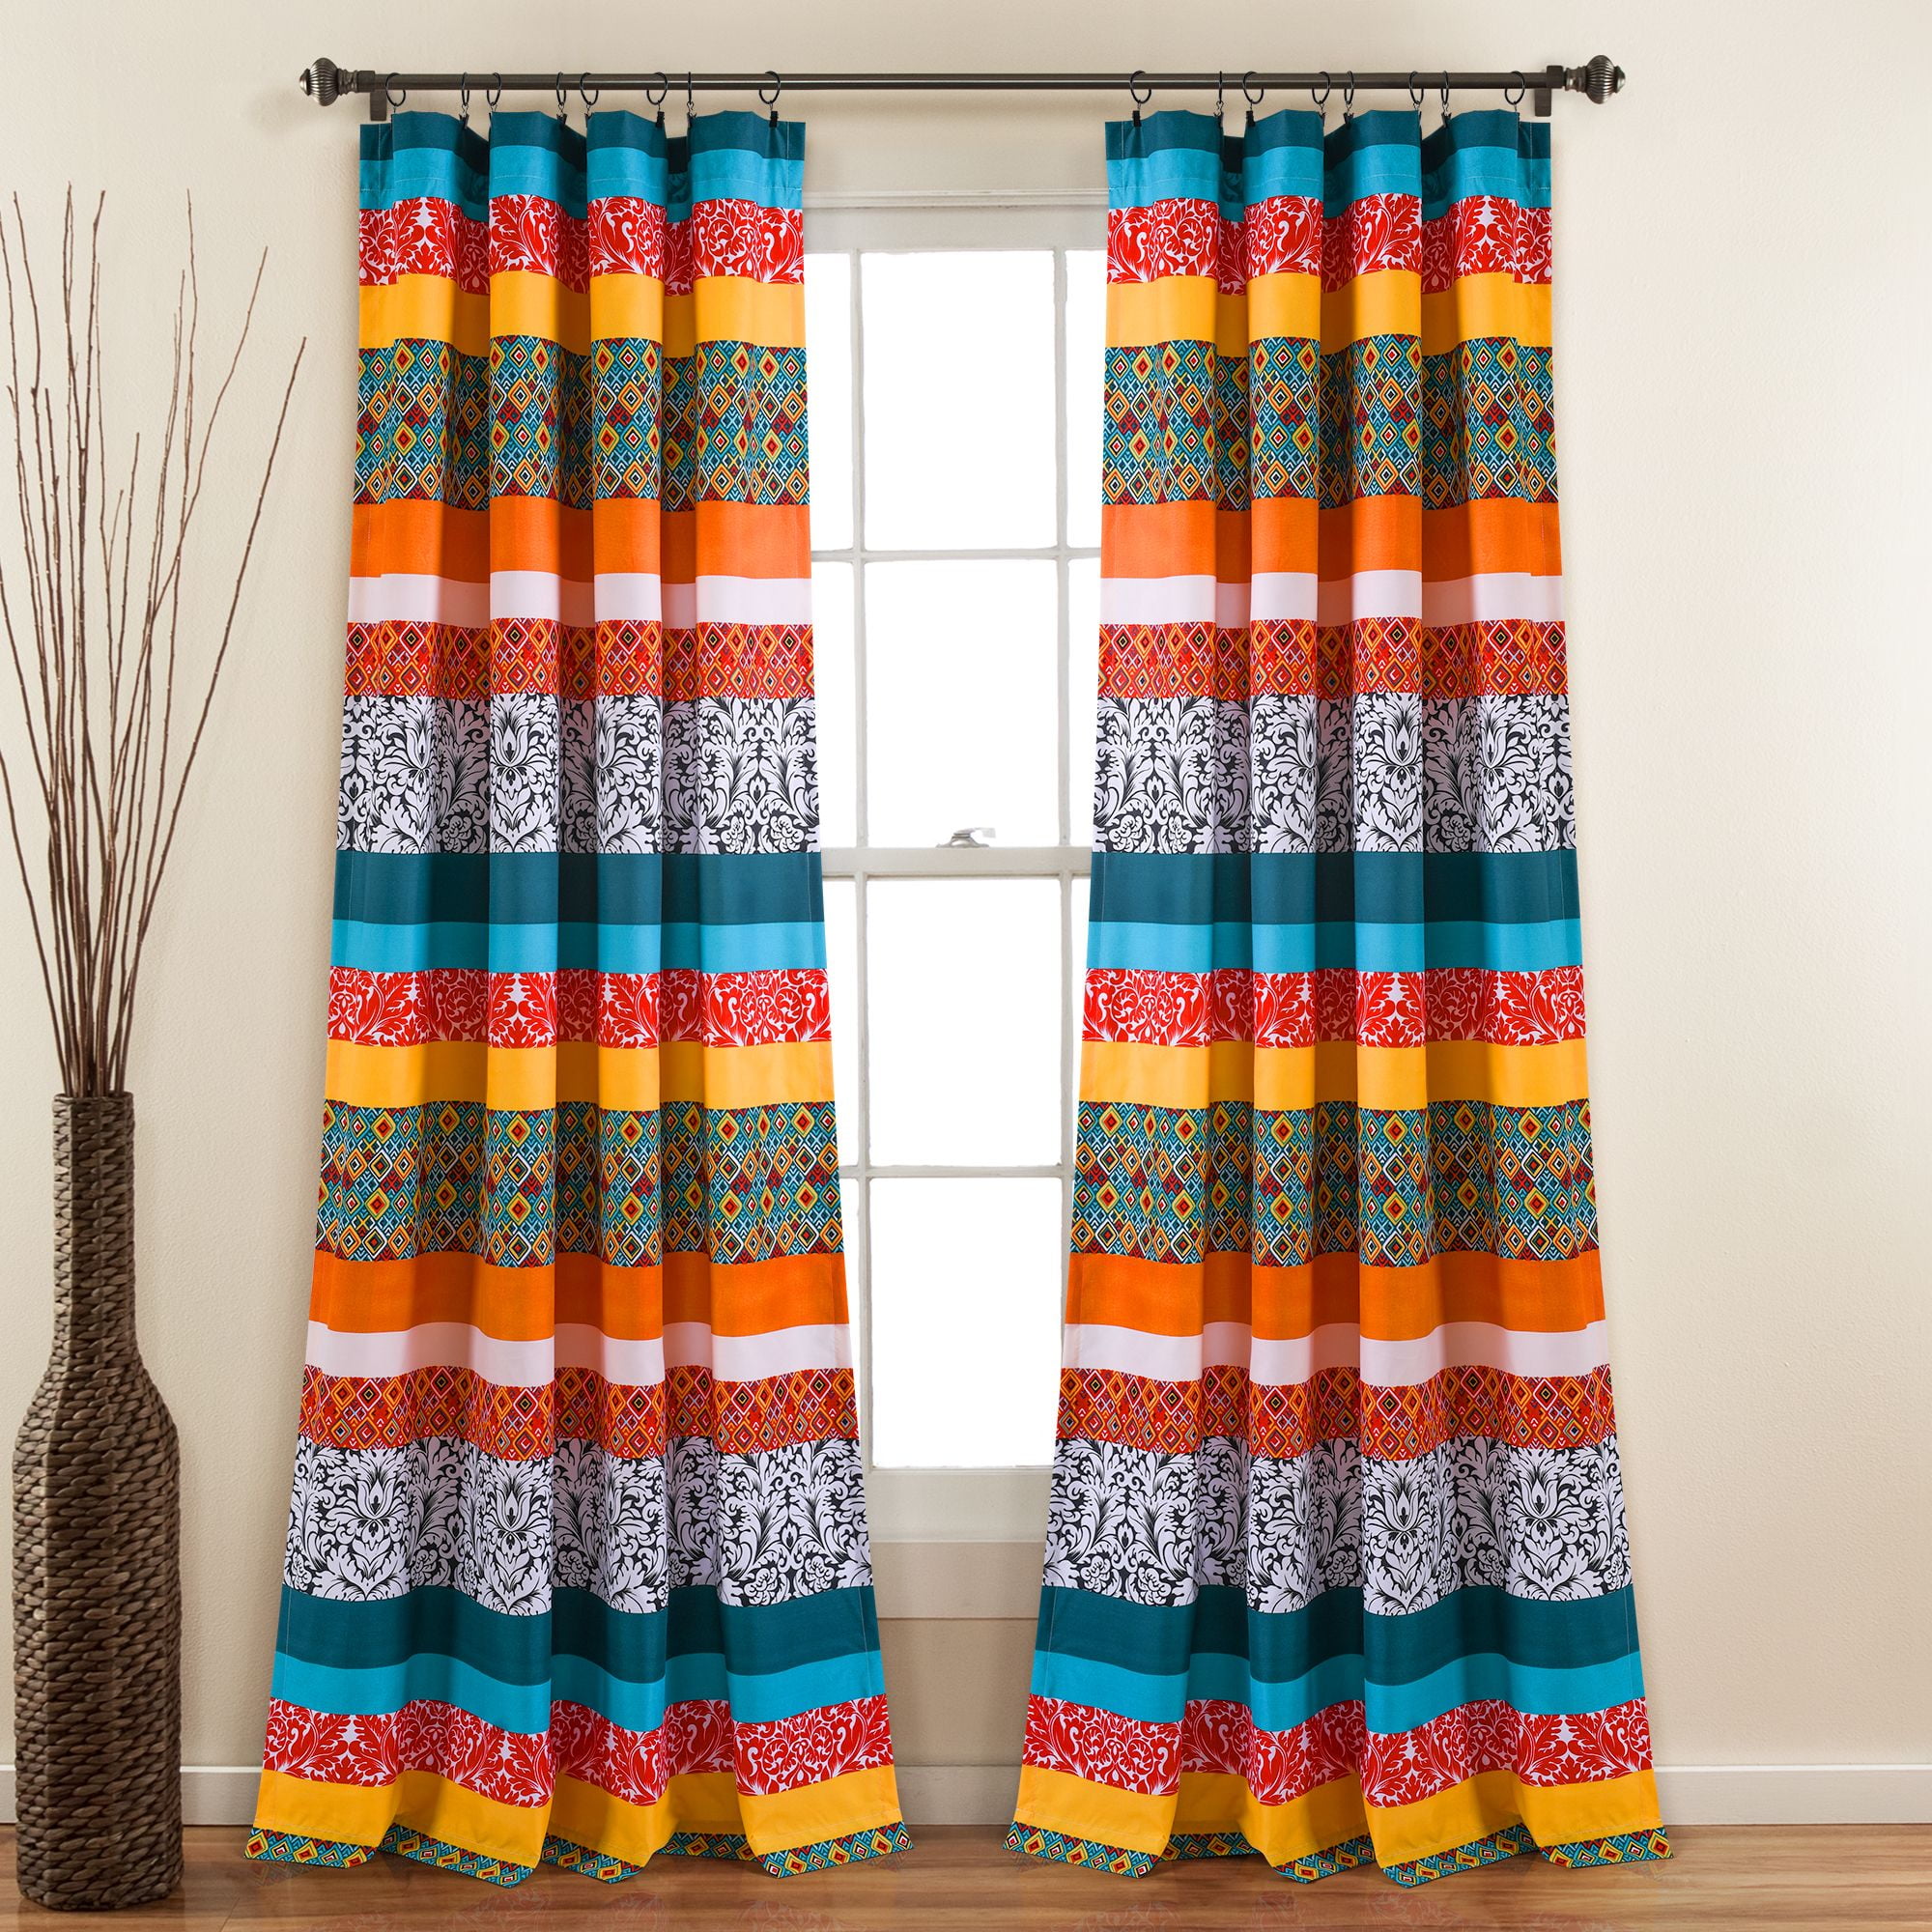 Details about   Hippie Window curtains Sky Beach Art Curtains for Living Room Bedroom Home Decor 